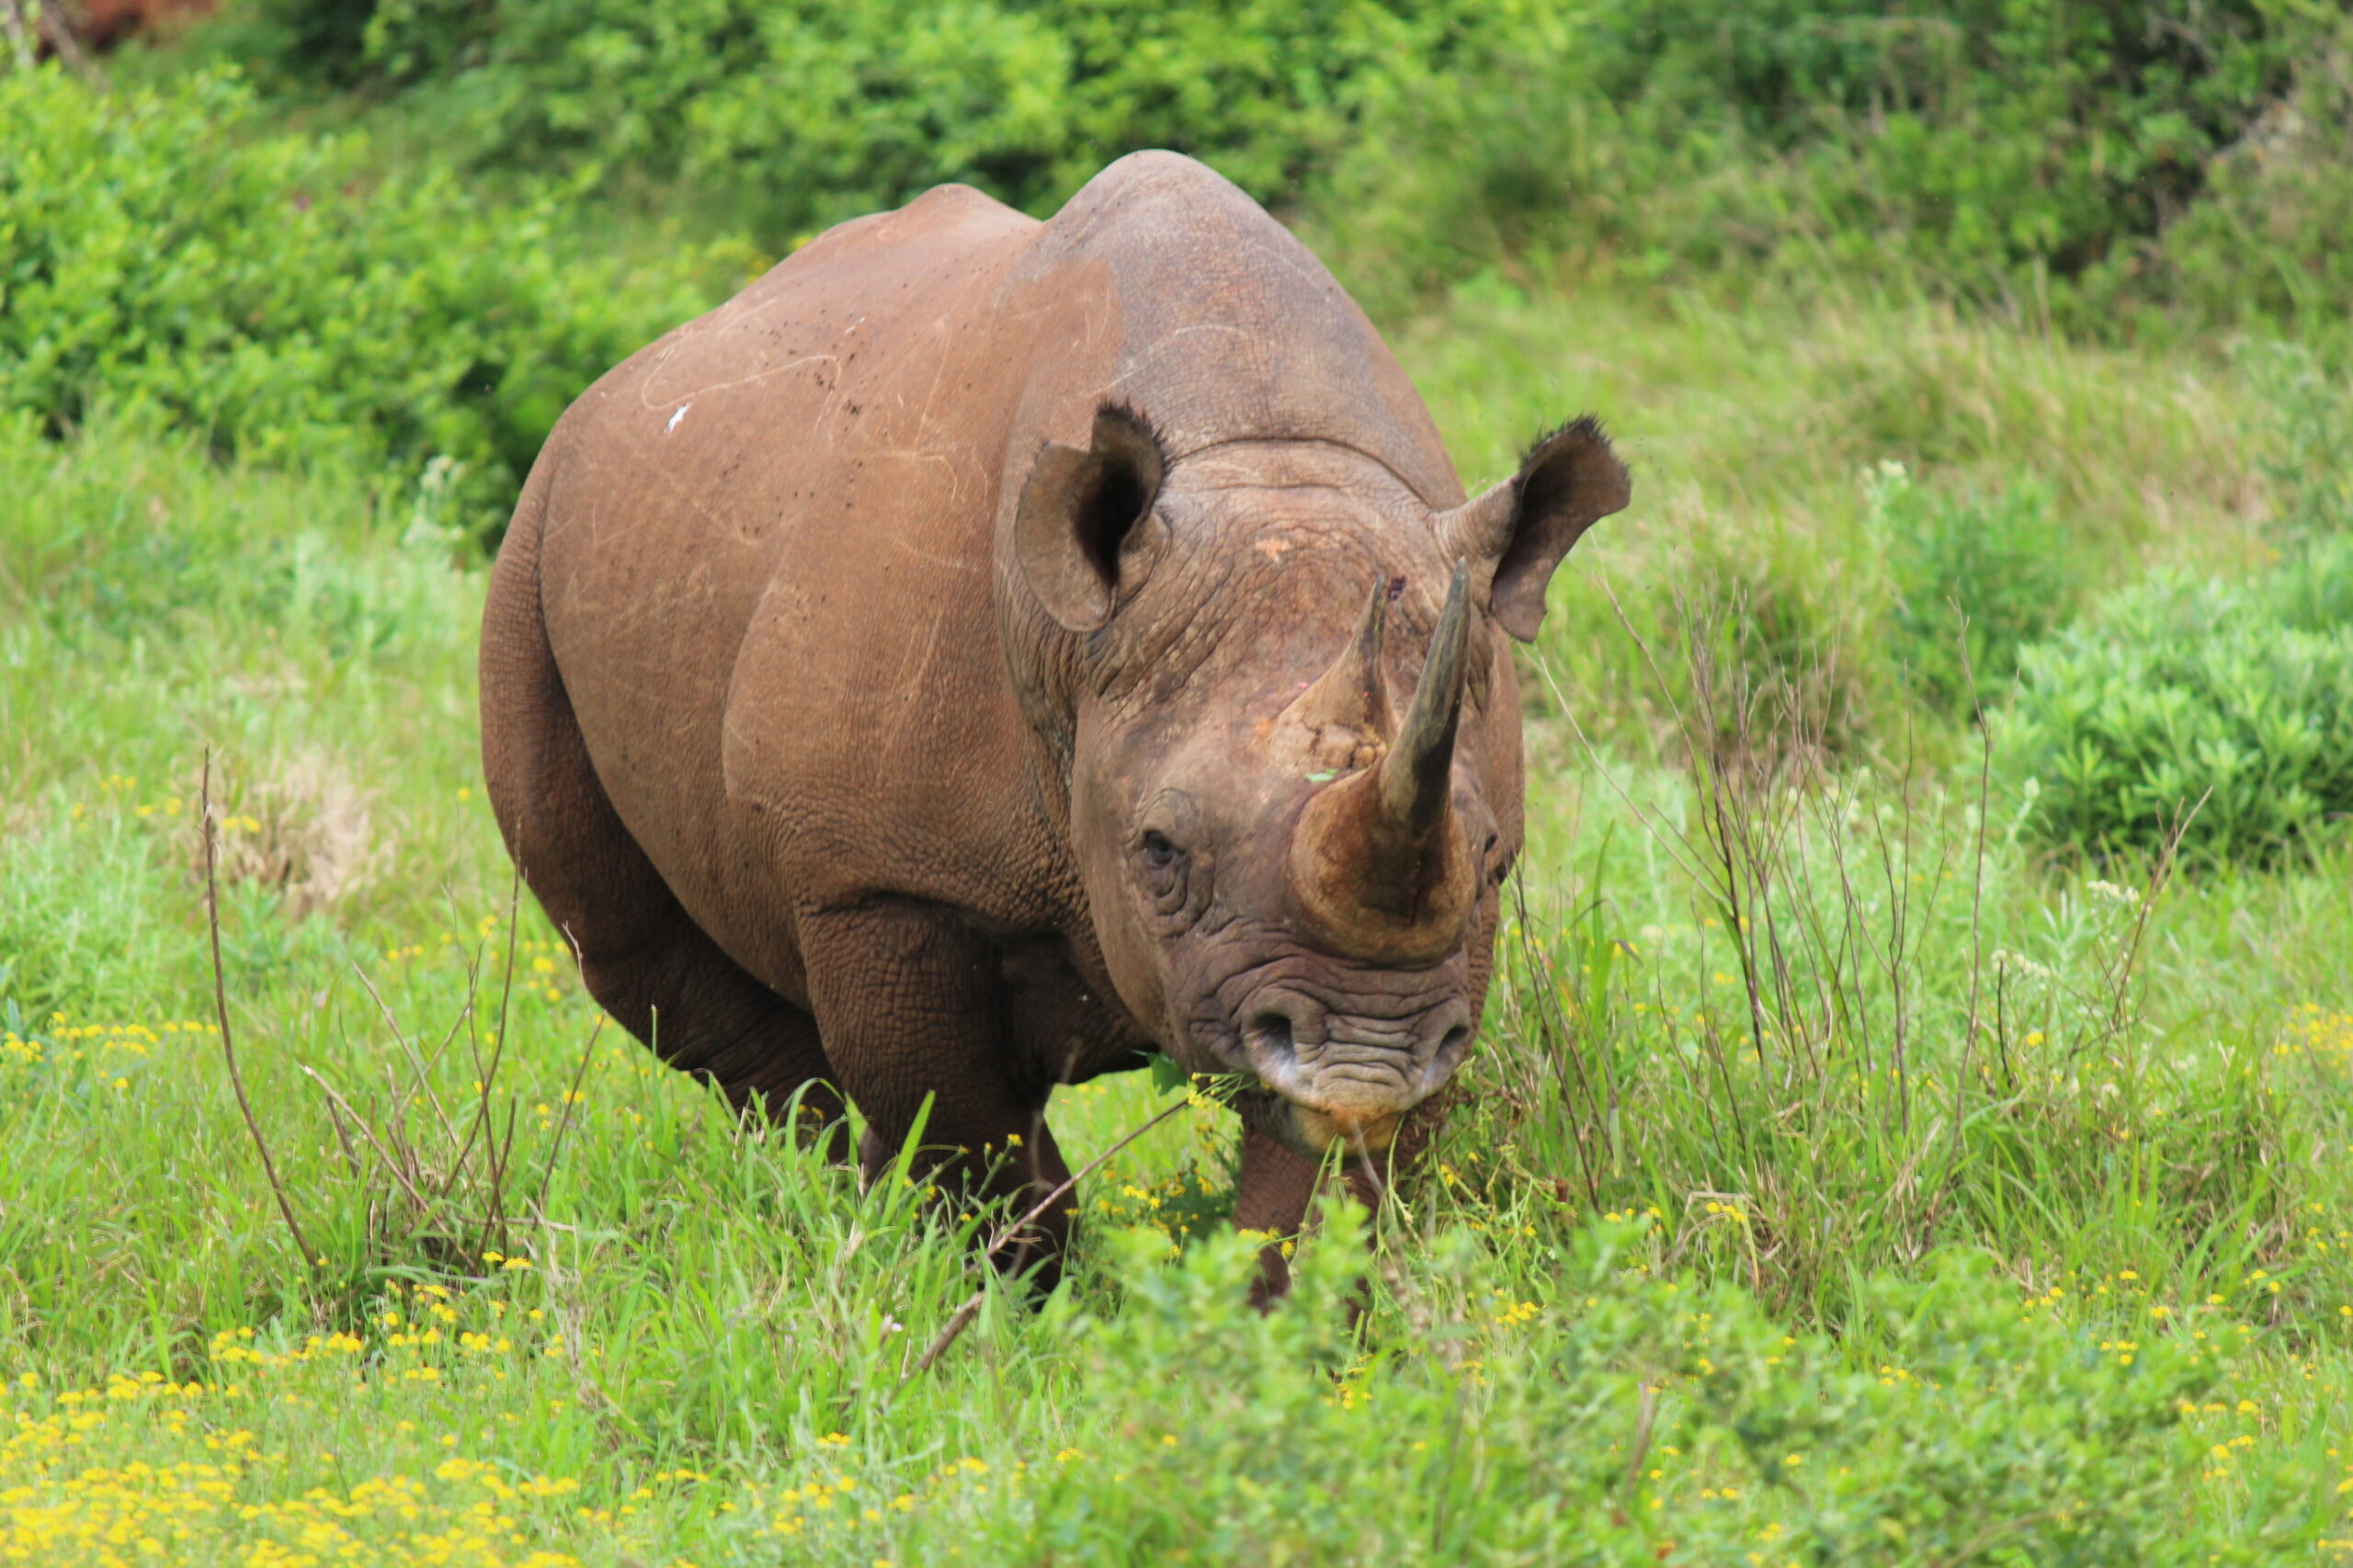 Addo black rhino | Addo Elephant National Park: The Ultimate South African Safari Park Guide